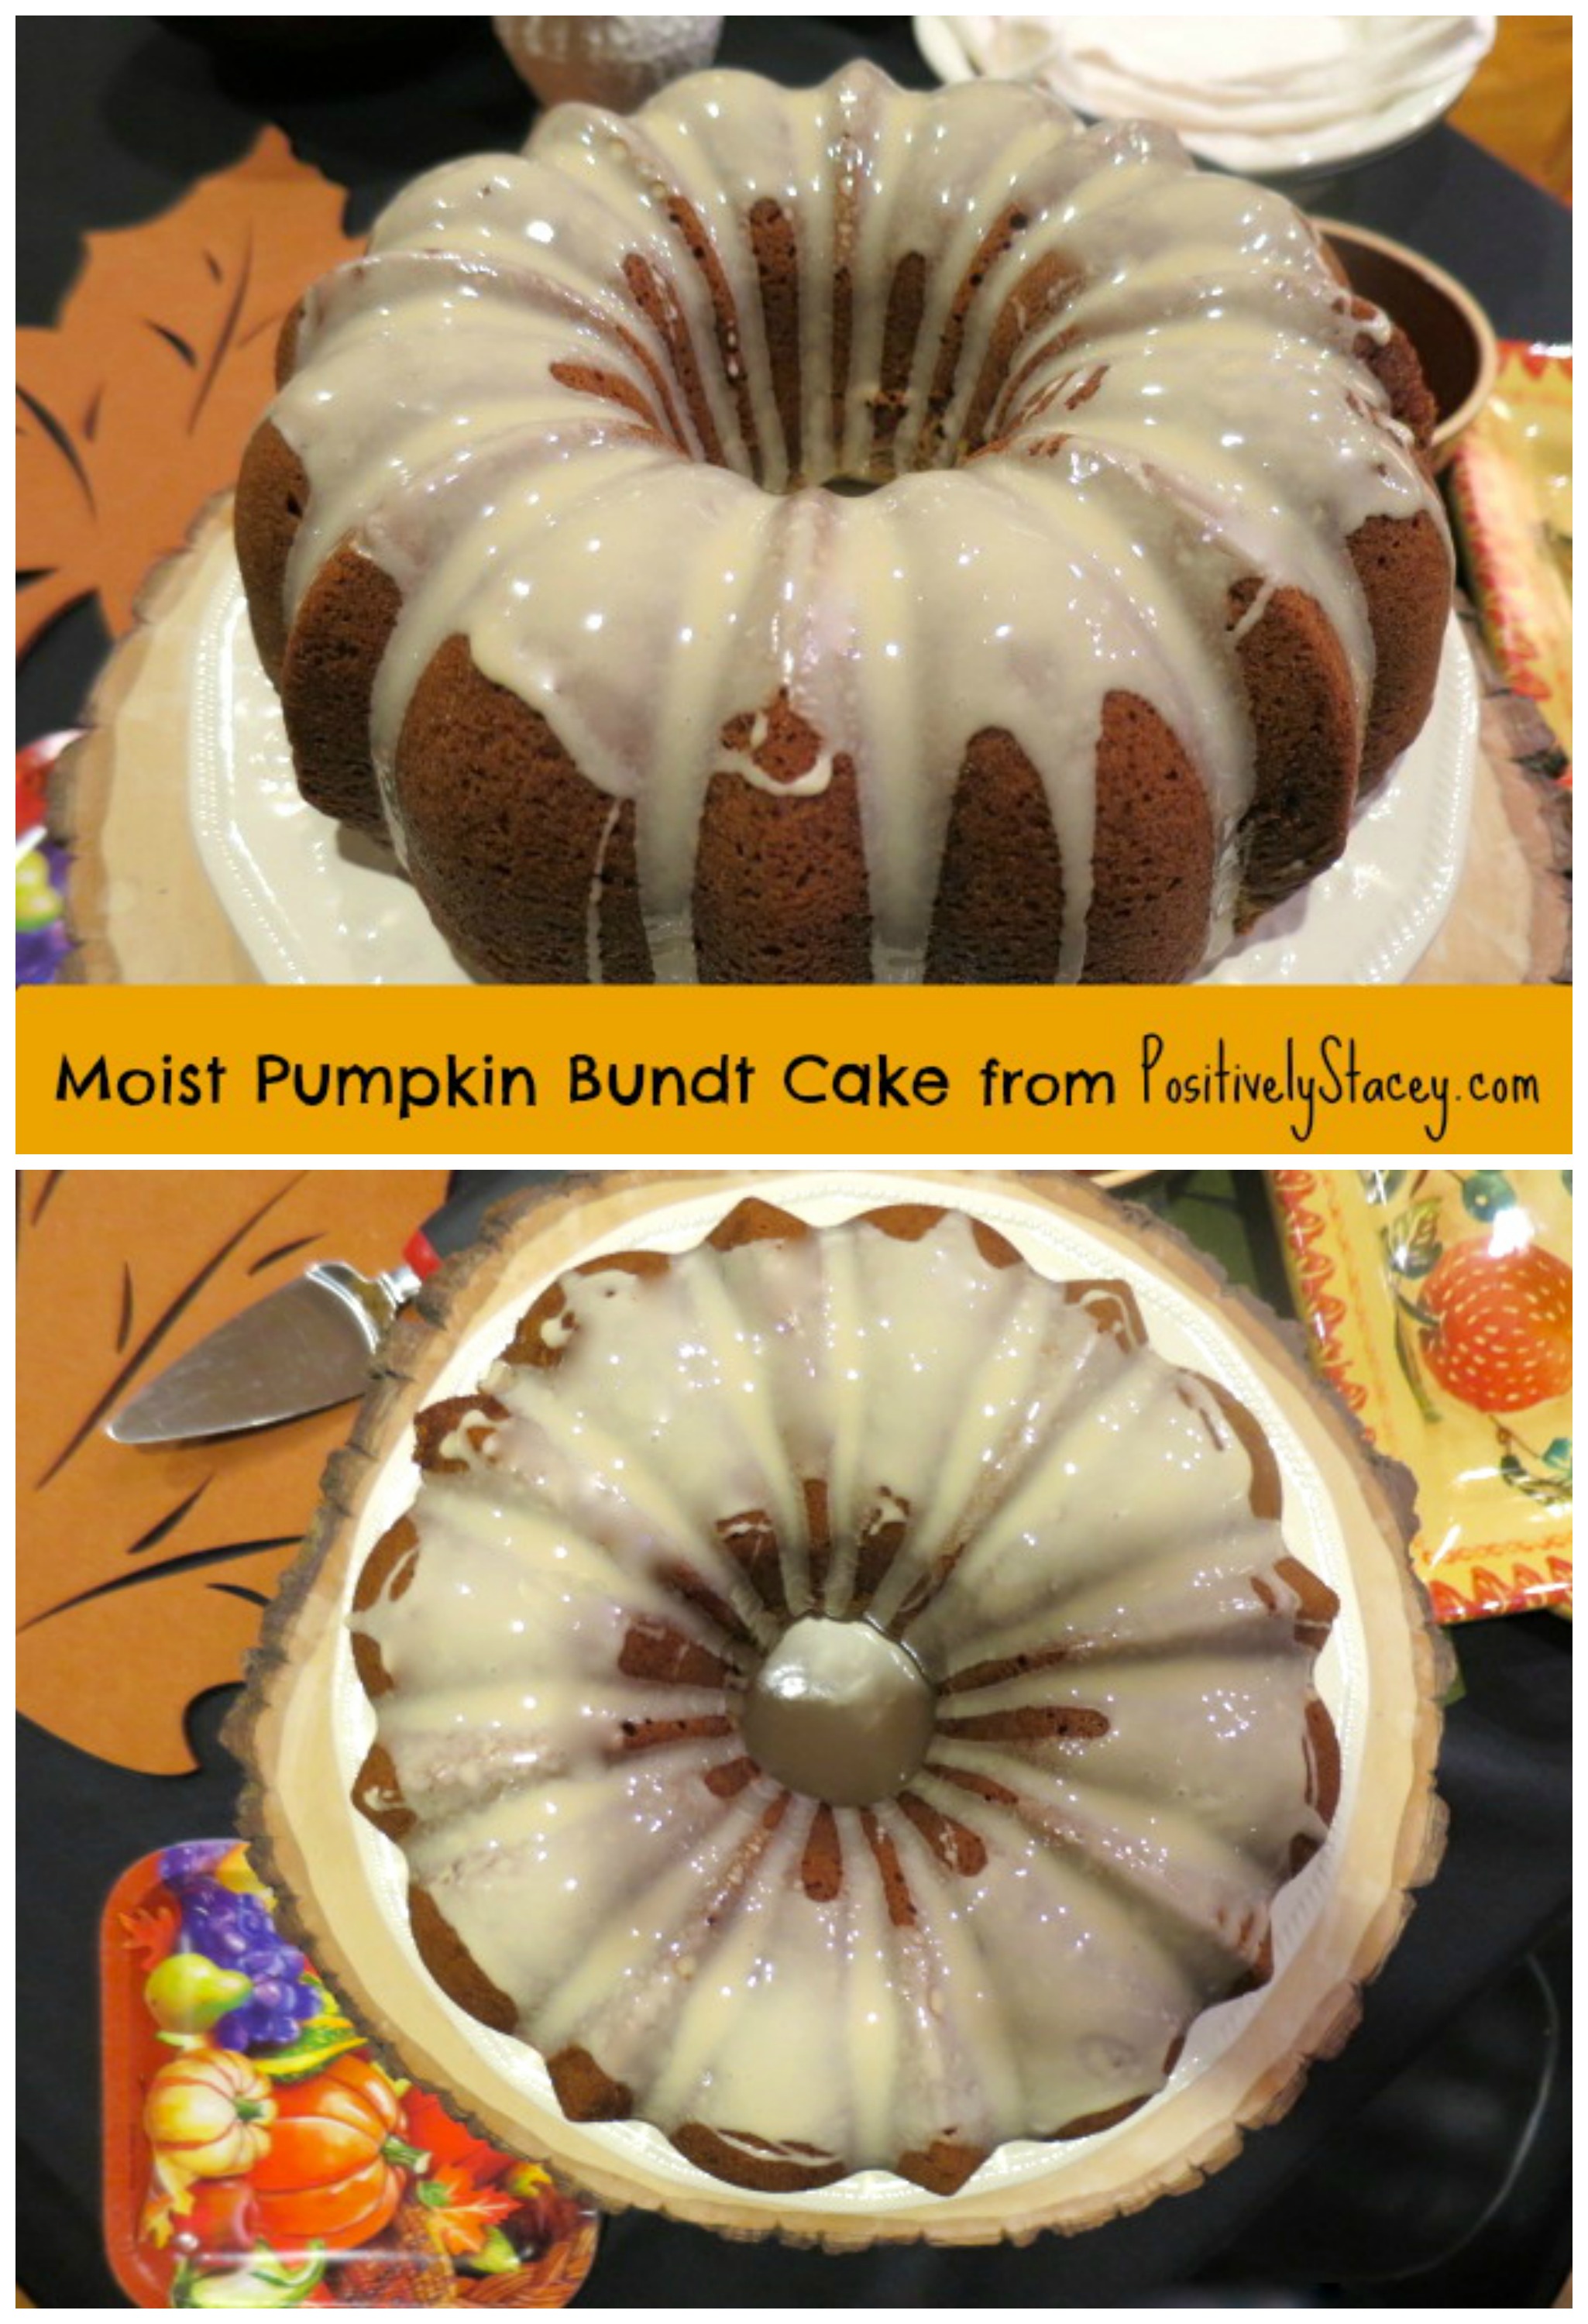 This cake was absolutely delicious! It is very moist and sort of along the lines of pumpkin bread - not overly sweet. I love Bundt cakes! They are easy to pop out of a Bundt pan, sprinkle with powdered sugar or drizzle with a glaze and viola you have an impressive cake